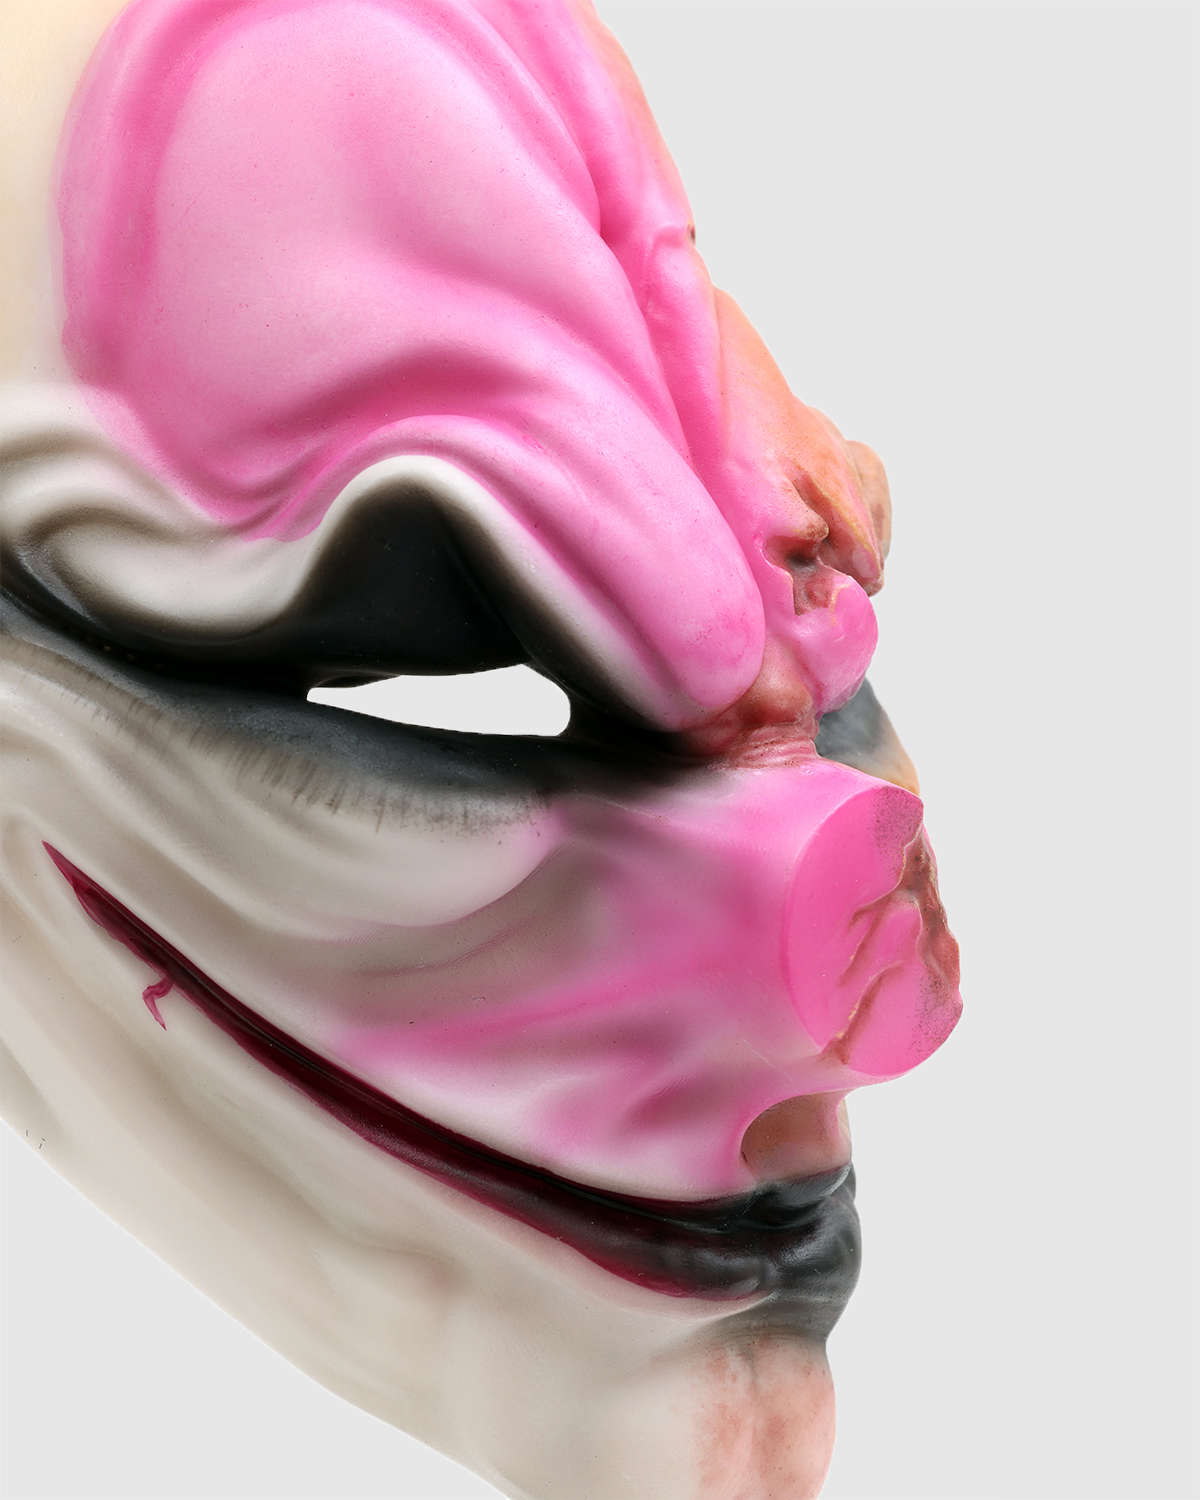 Limited Edition 1:2 scale Desktop Replica "Hoxton Mask"